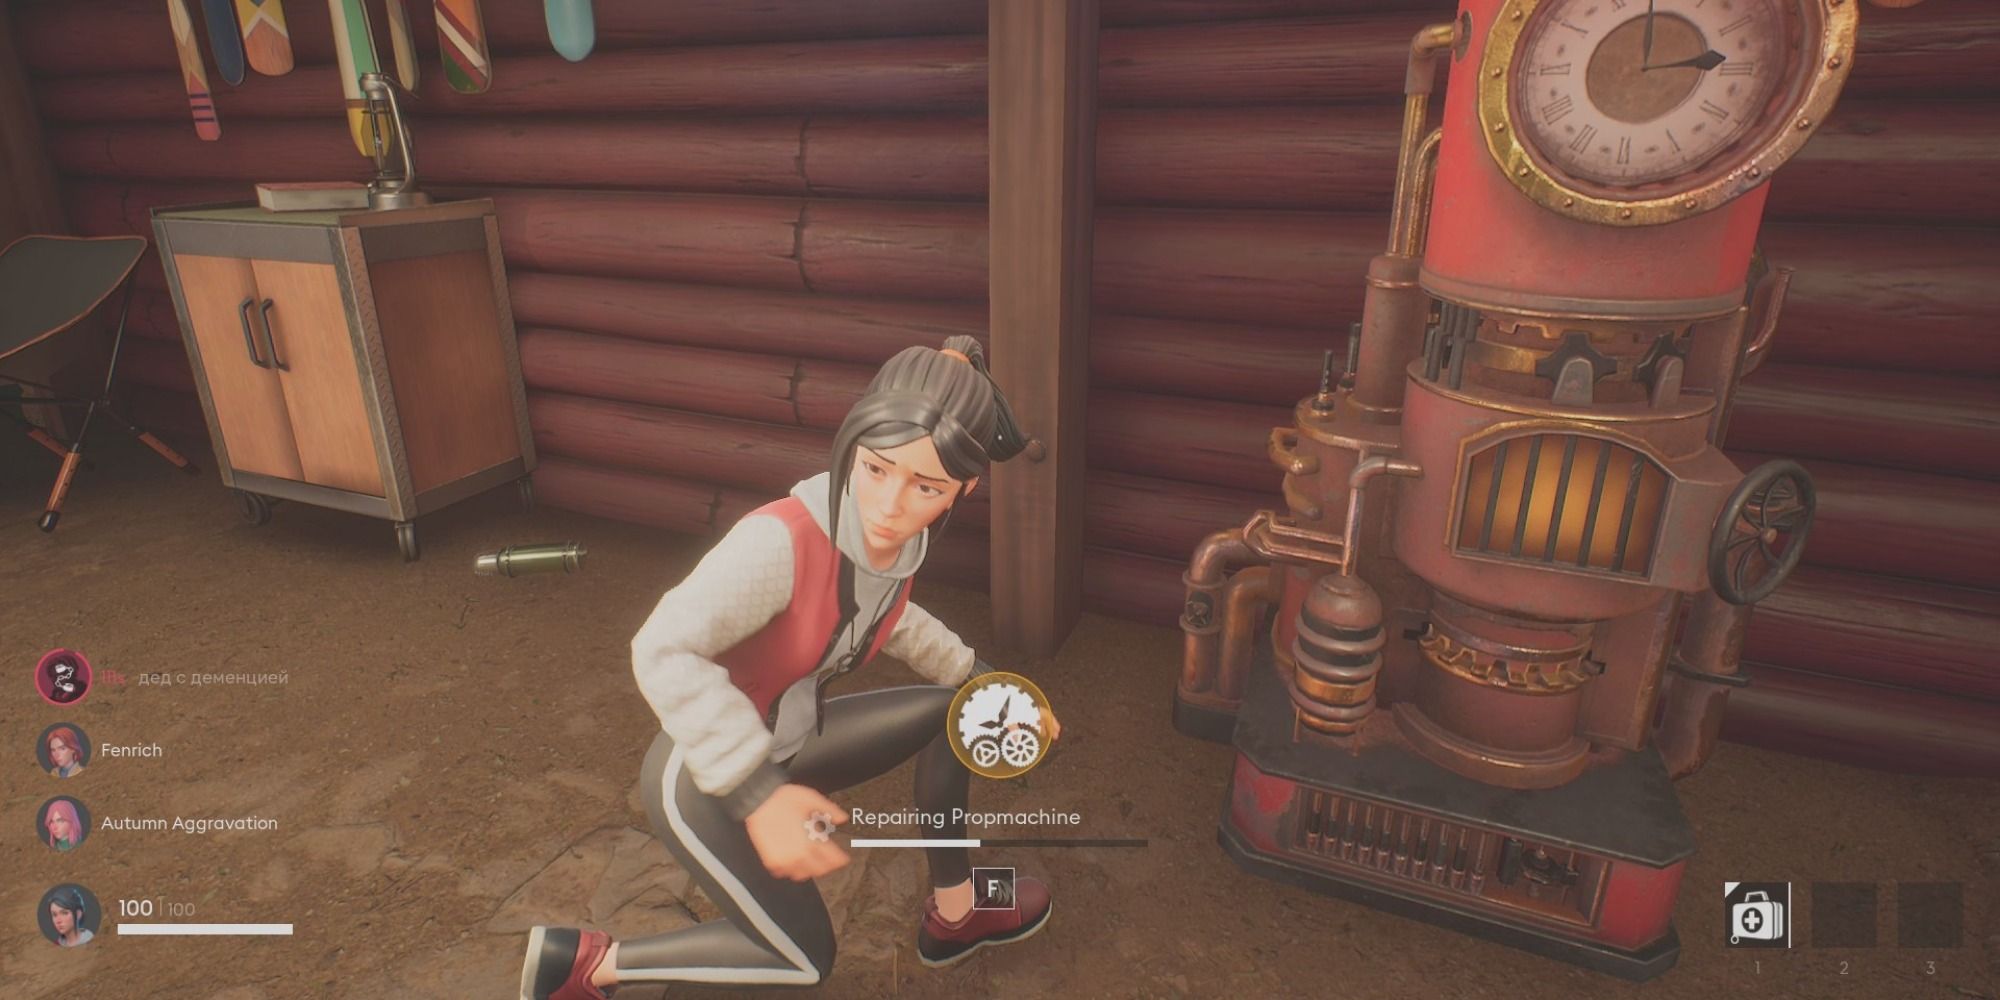 Taiga kneels in front of a propmachine at Camp map, activating a repair skill check